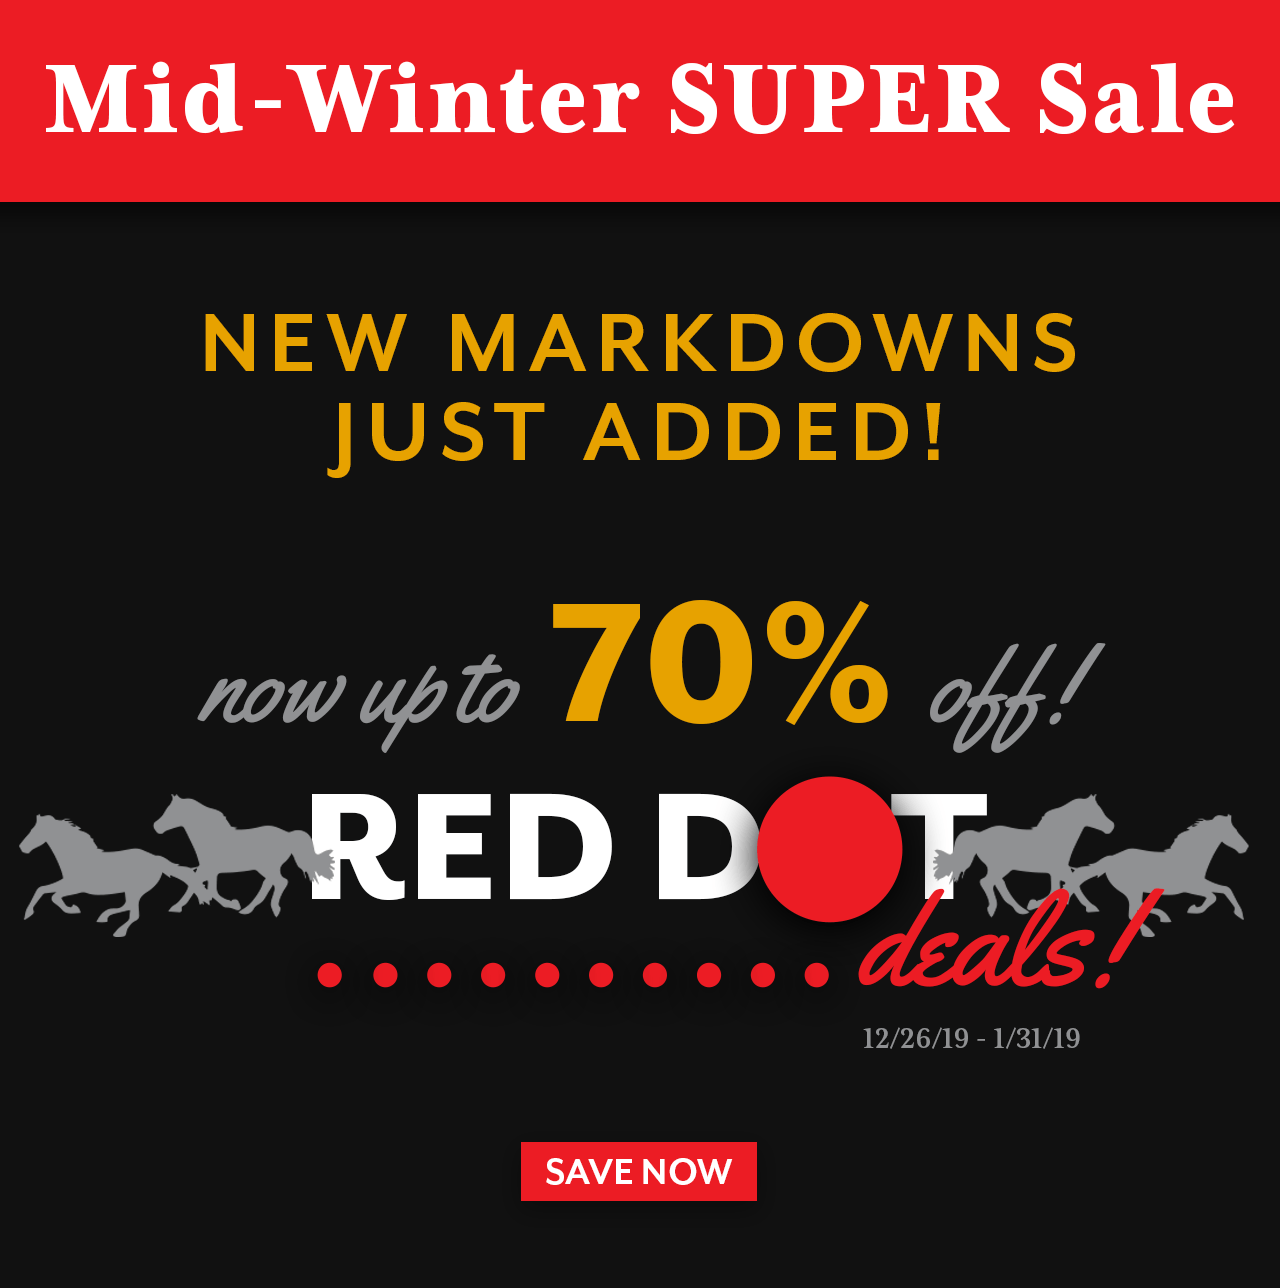 New markdowns just added to our Mid-Winter Super Sale! Now up to 70% off!